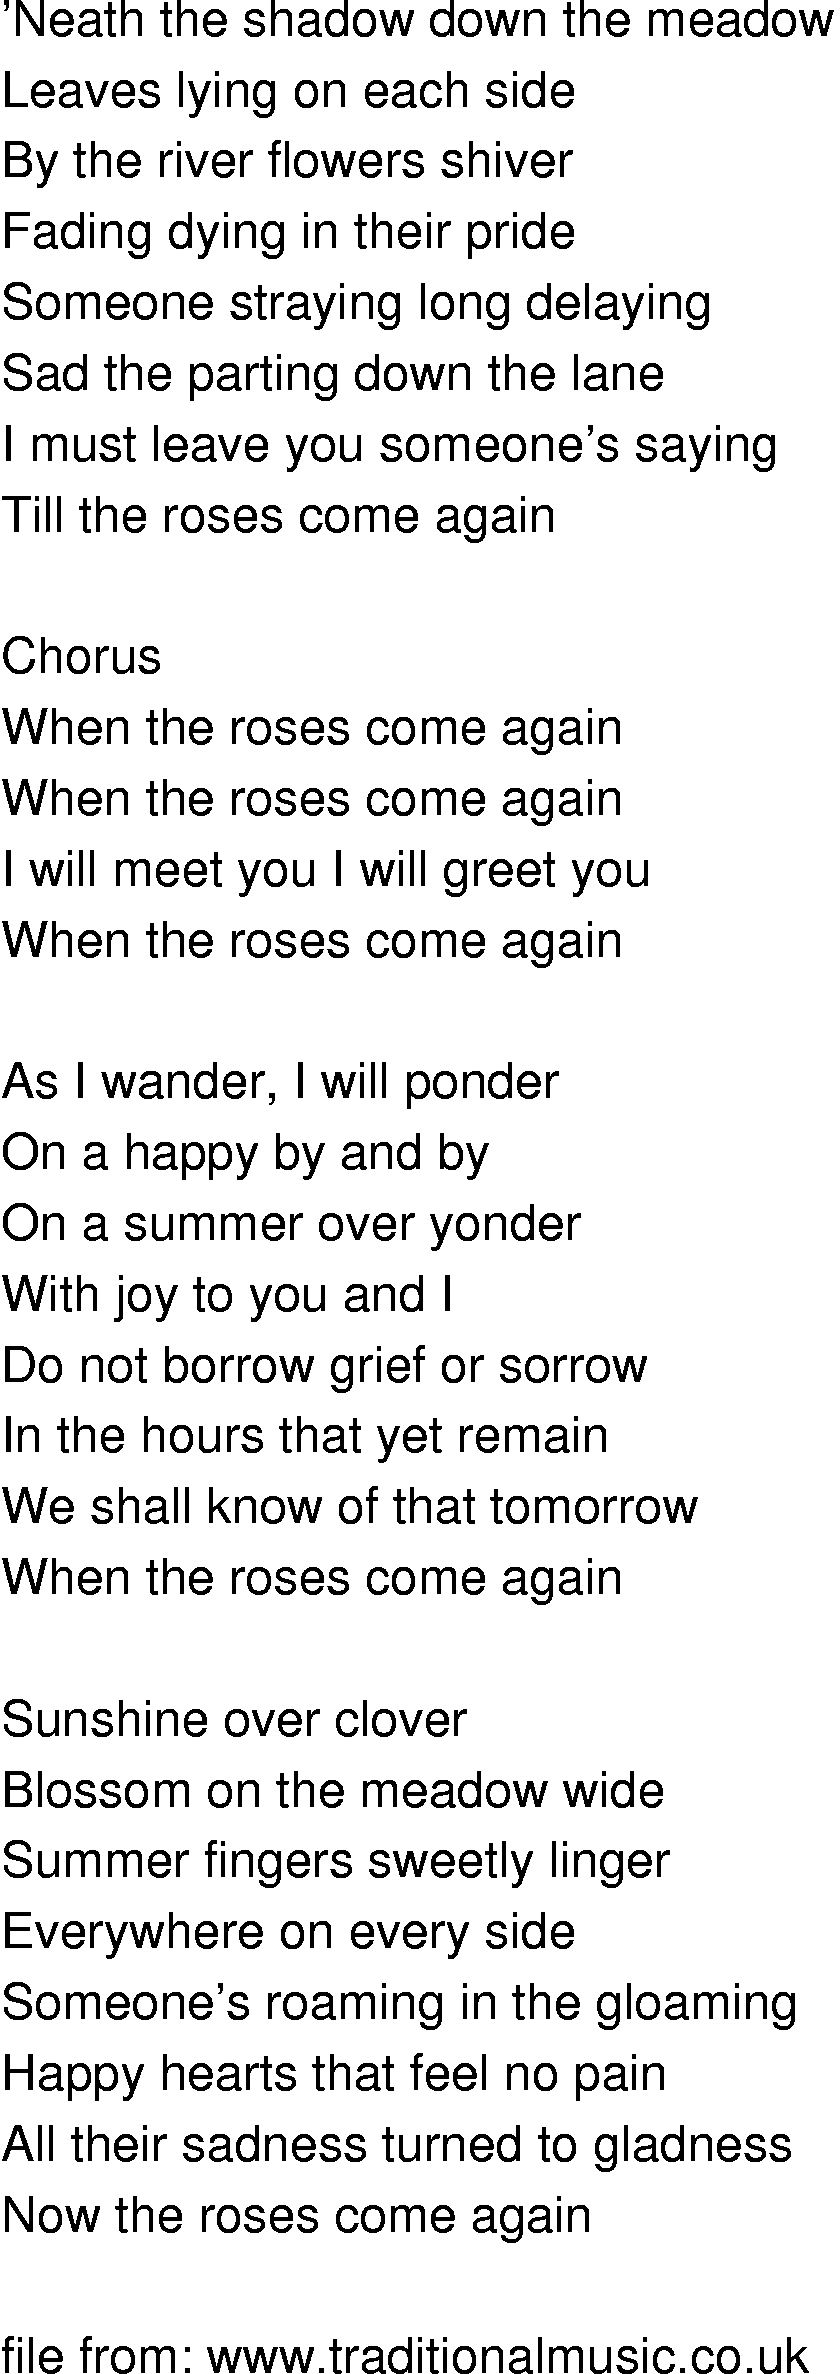 Old-Time (oldtimey) Song Lyrics - when the roses come again